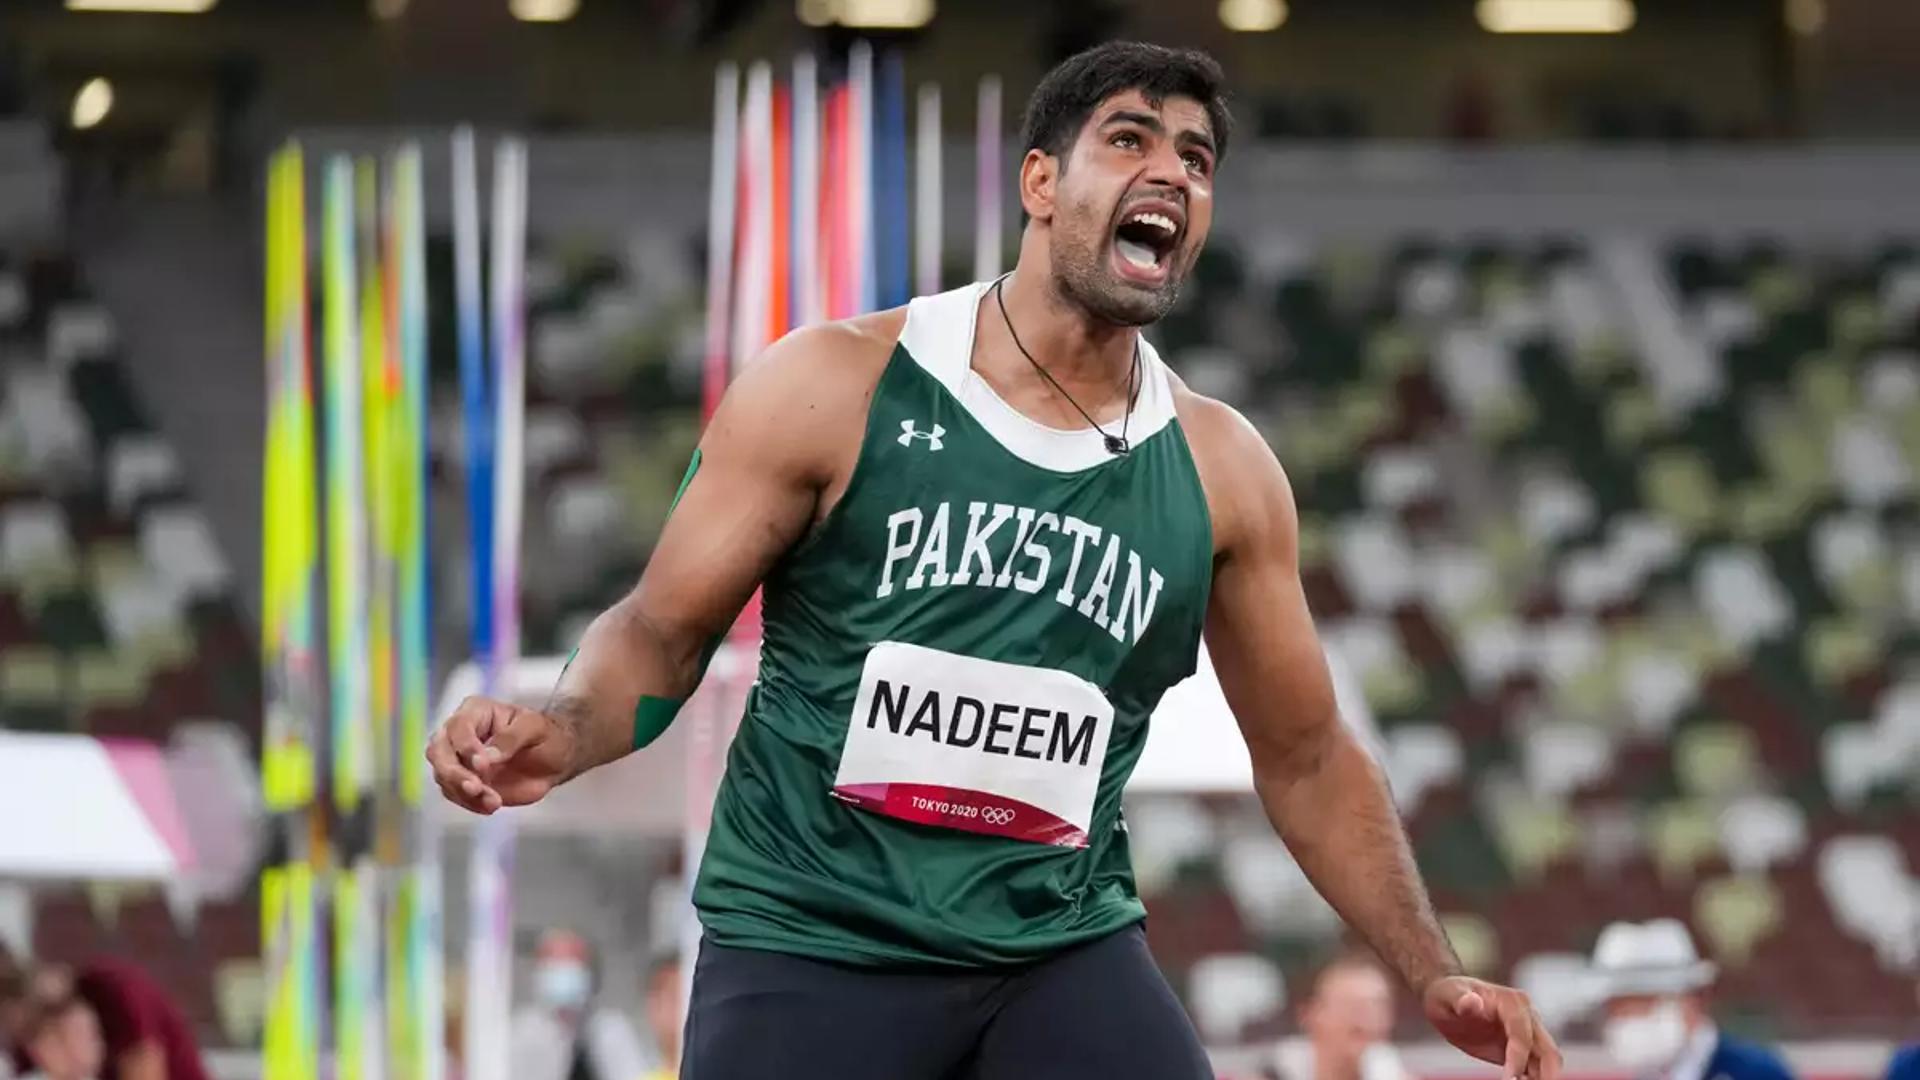 Arshad Nadeem in action during Tokyo Olympics 2020 (Image Credits - Olympics.com)